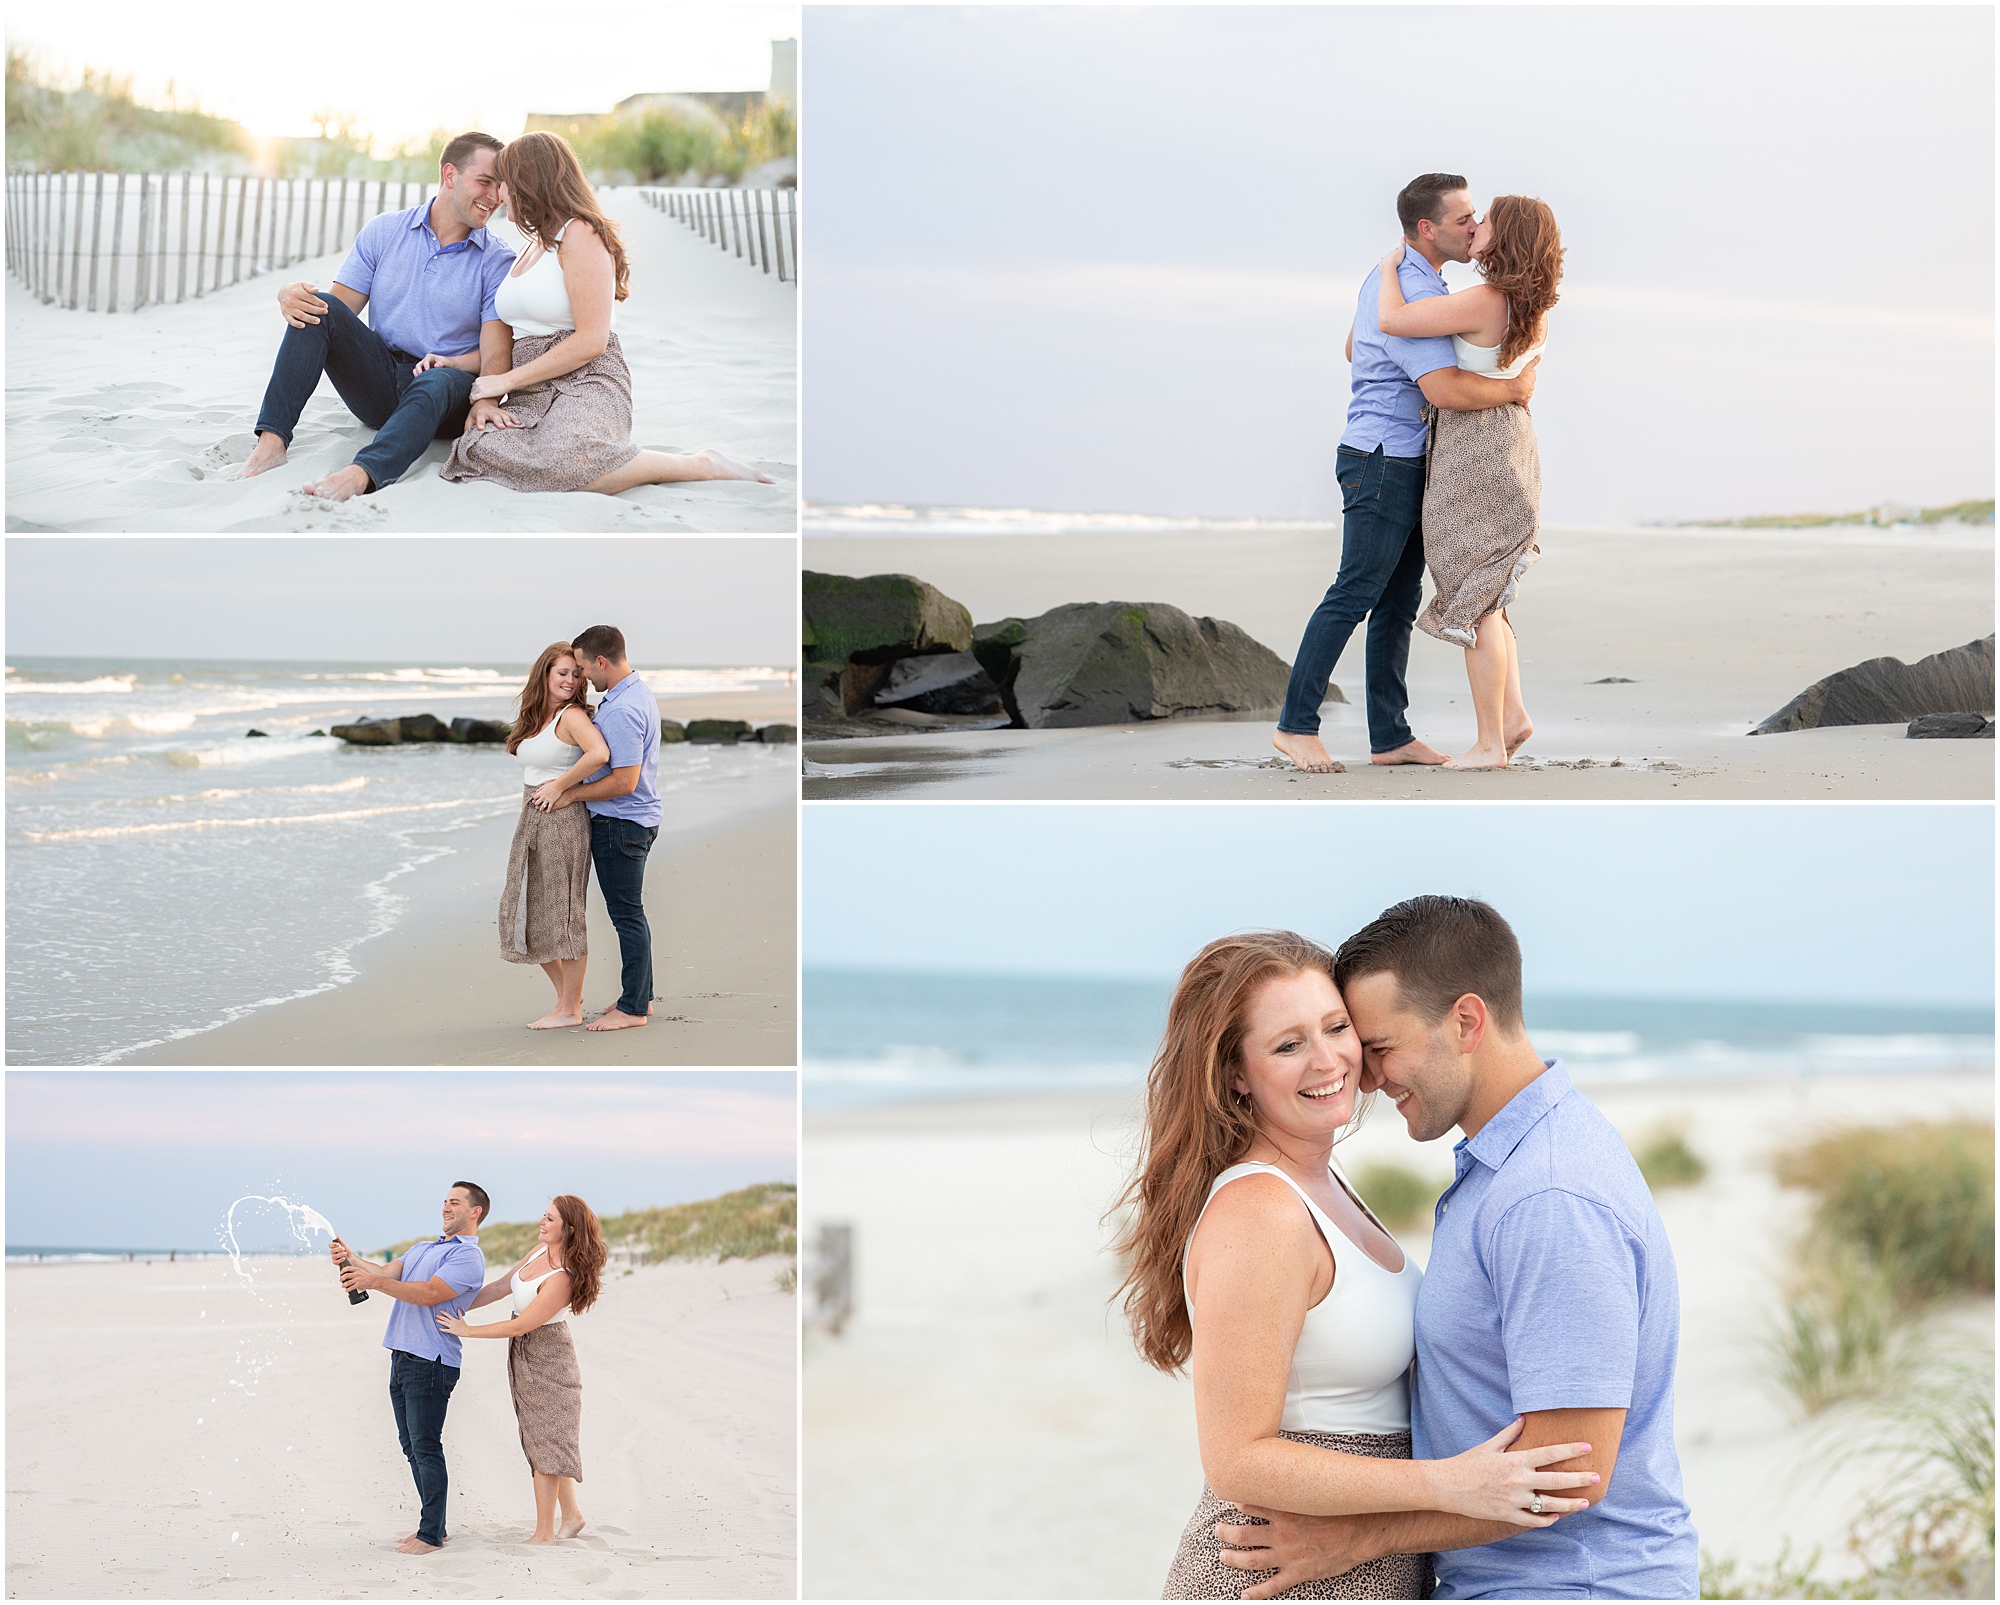 Stone Harbor, NJ Is a great Jersey Shore location for a New Jersey engagement session